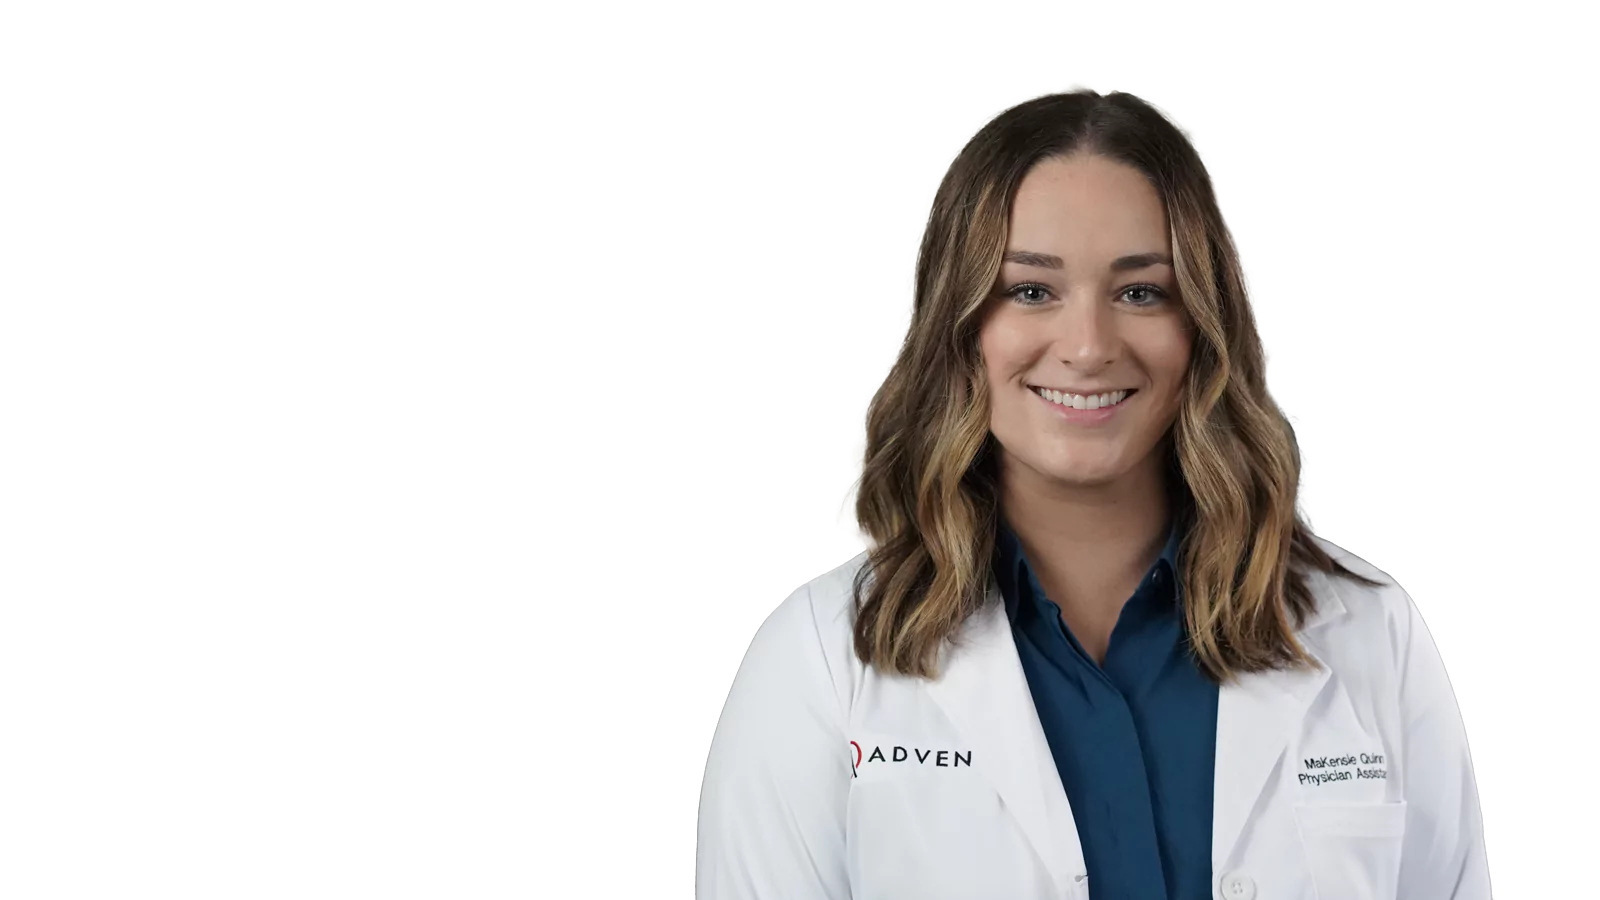 ADVENT Wauwatosa Provider - Physician Assistant - MaKensie Quinn, PA-C Thumbnail Image 300x300